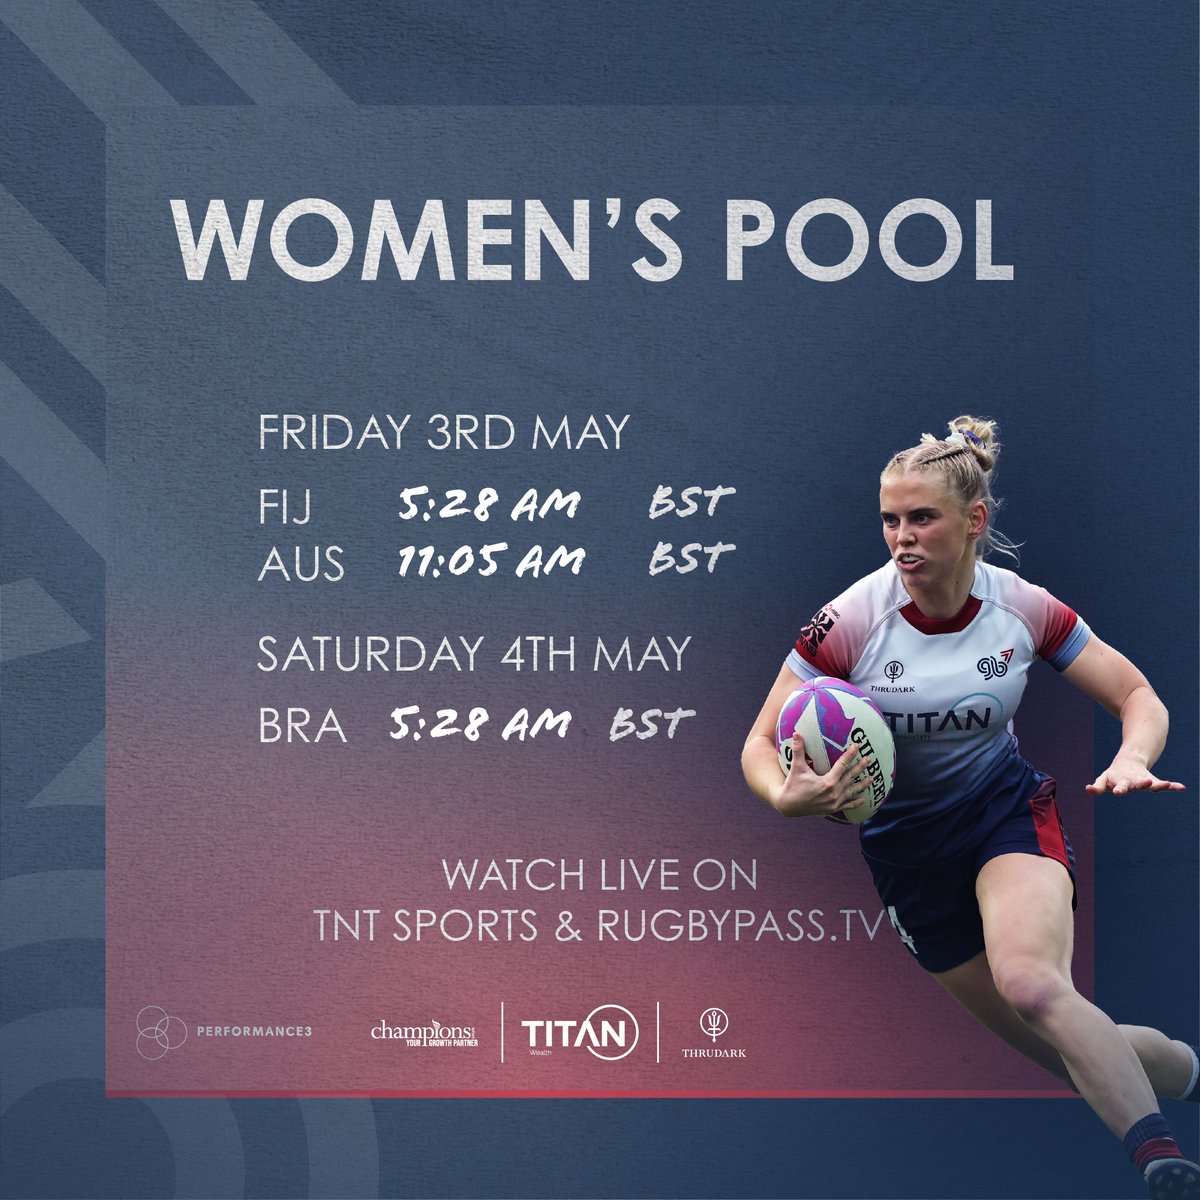 Our Singapore Pool Fixtures 🇸🇬 Watch live on TNT Sports & Rugbypass.tv 📽️ #GB7s #HSBCSVNS #HSBCSVNSSGP #RoadToParis